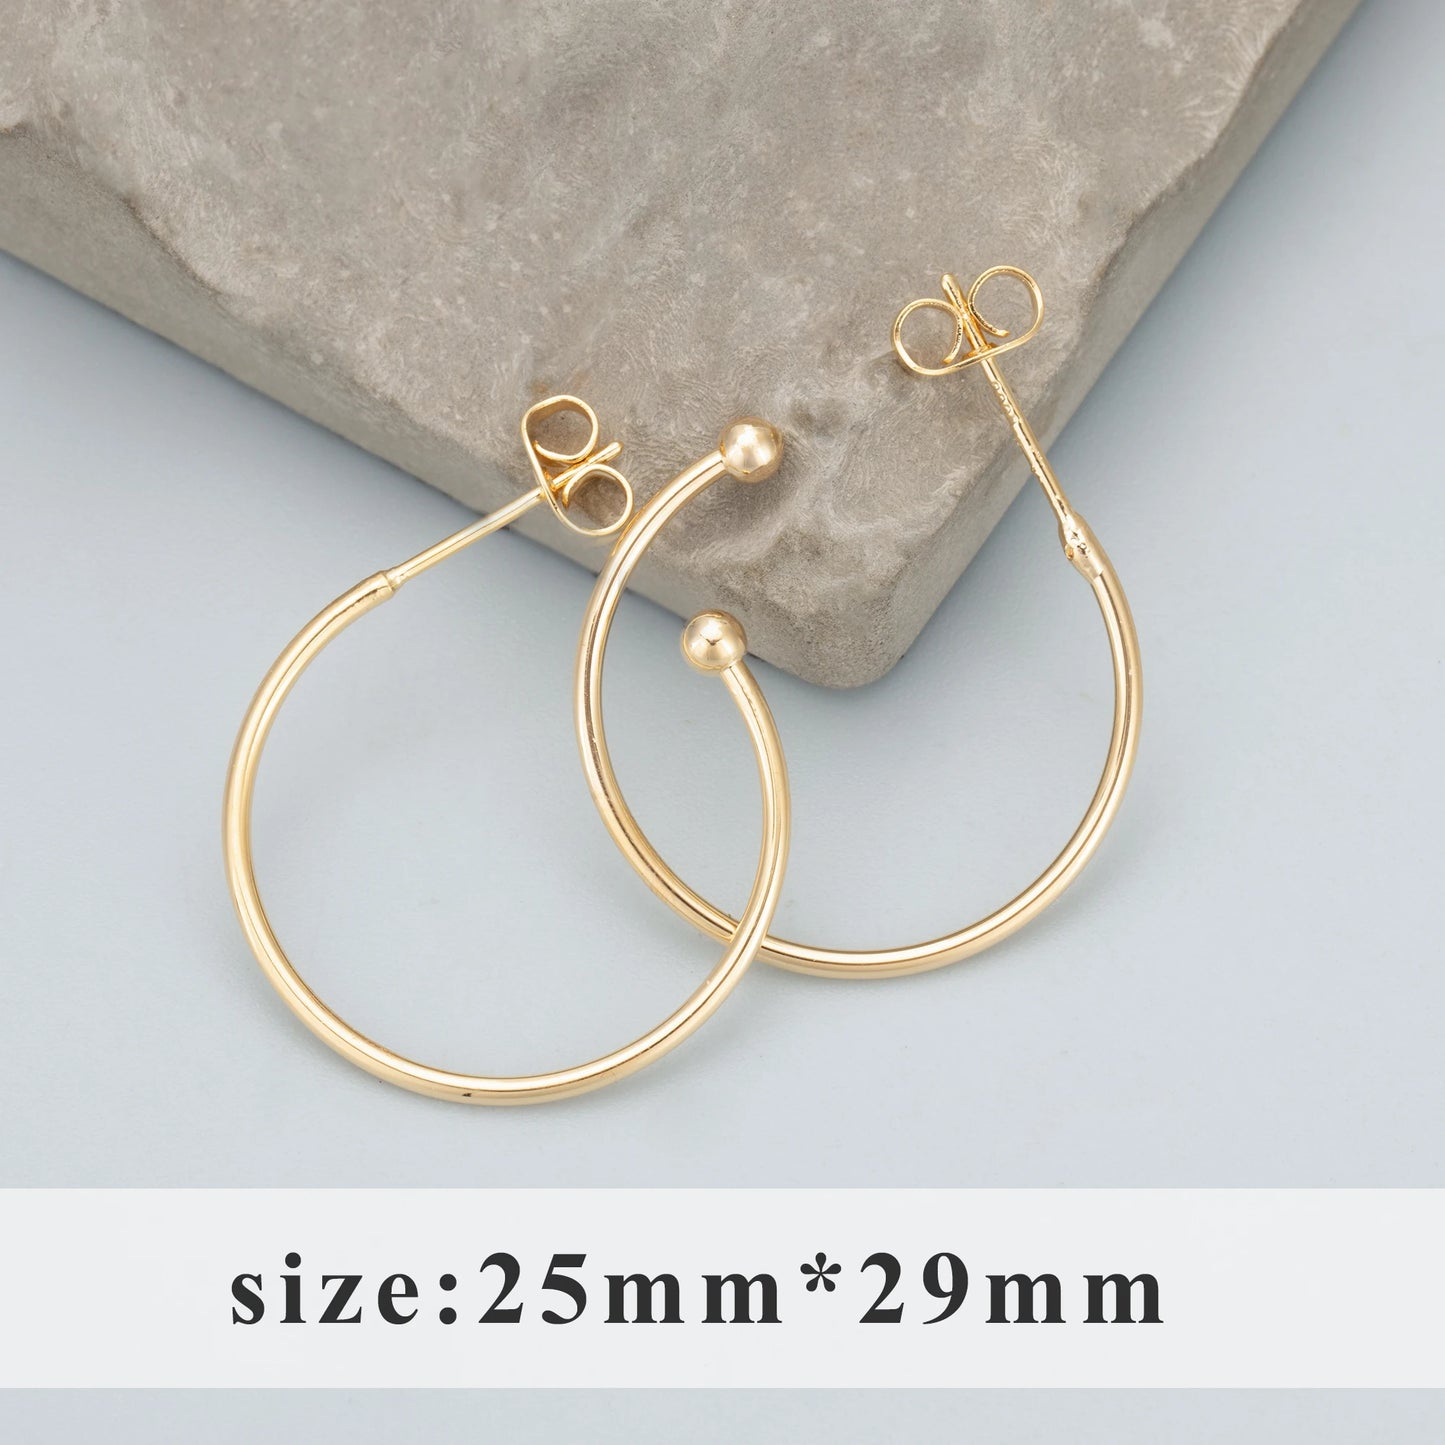 GUFEATHER MC19,jewelry accessories,18k gold plated,pass REACH,nickel free,round ring,charms,jewelry making,diy earrings,6pcs/lot